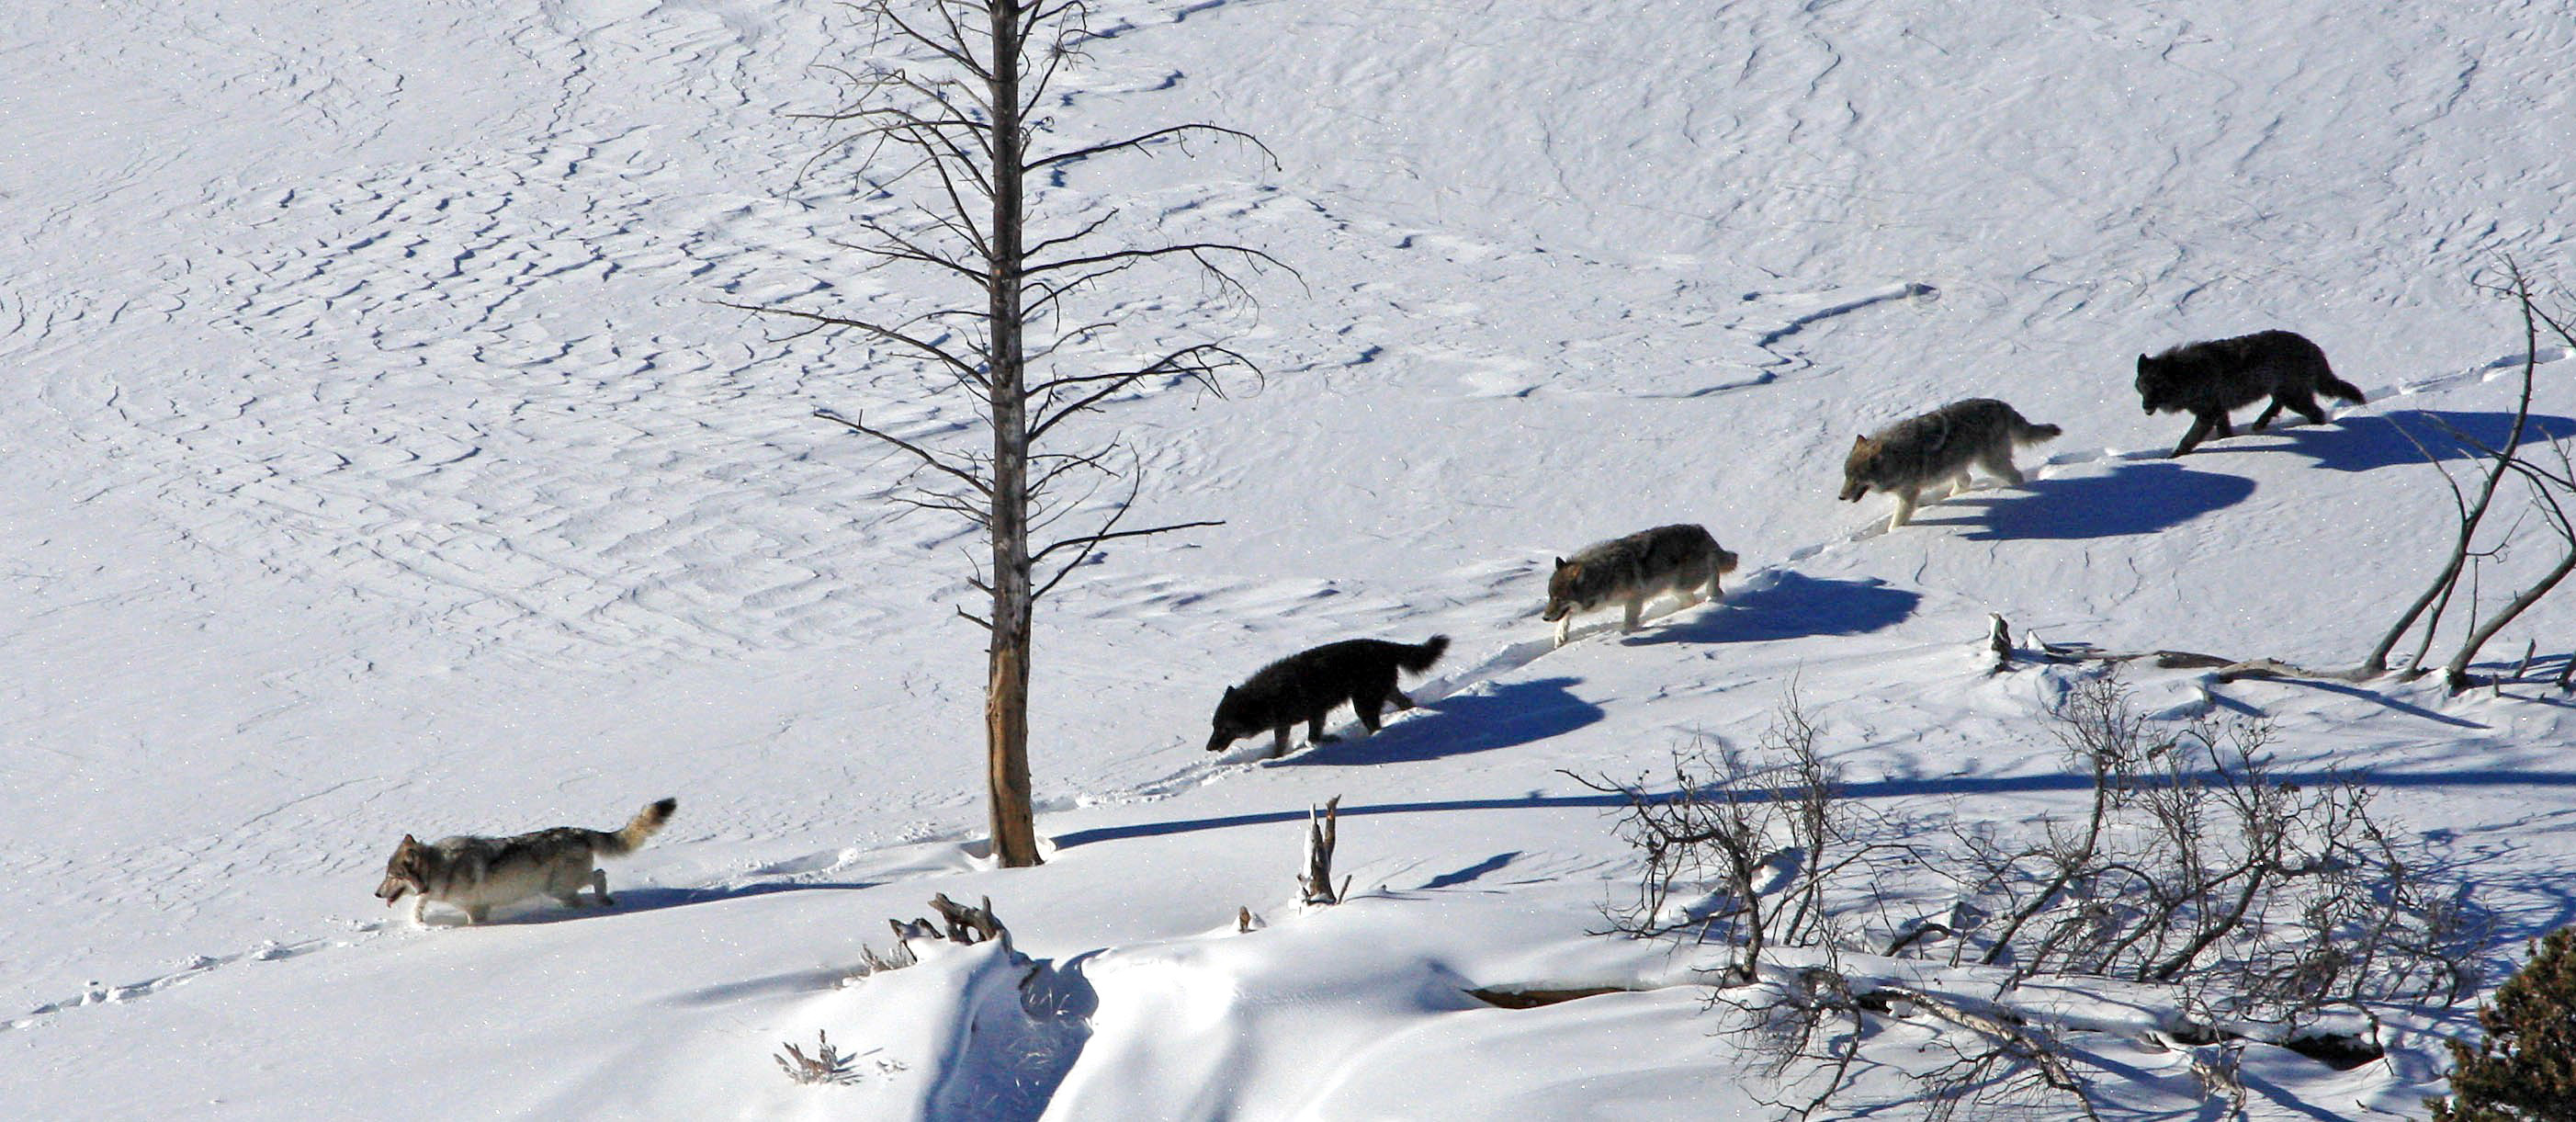 Hungry wolf pack rearranges balance in Yellowstone Park | The Spokesman-Review